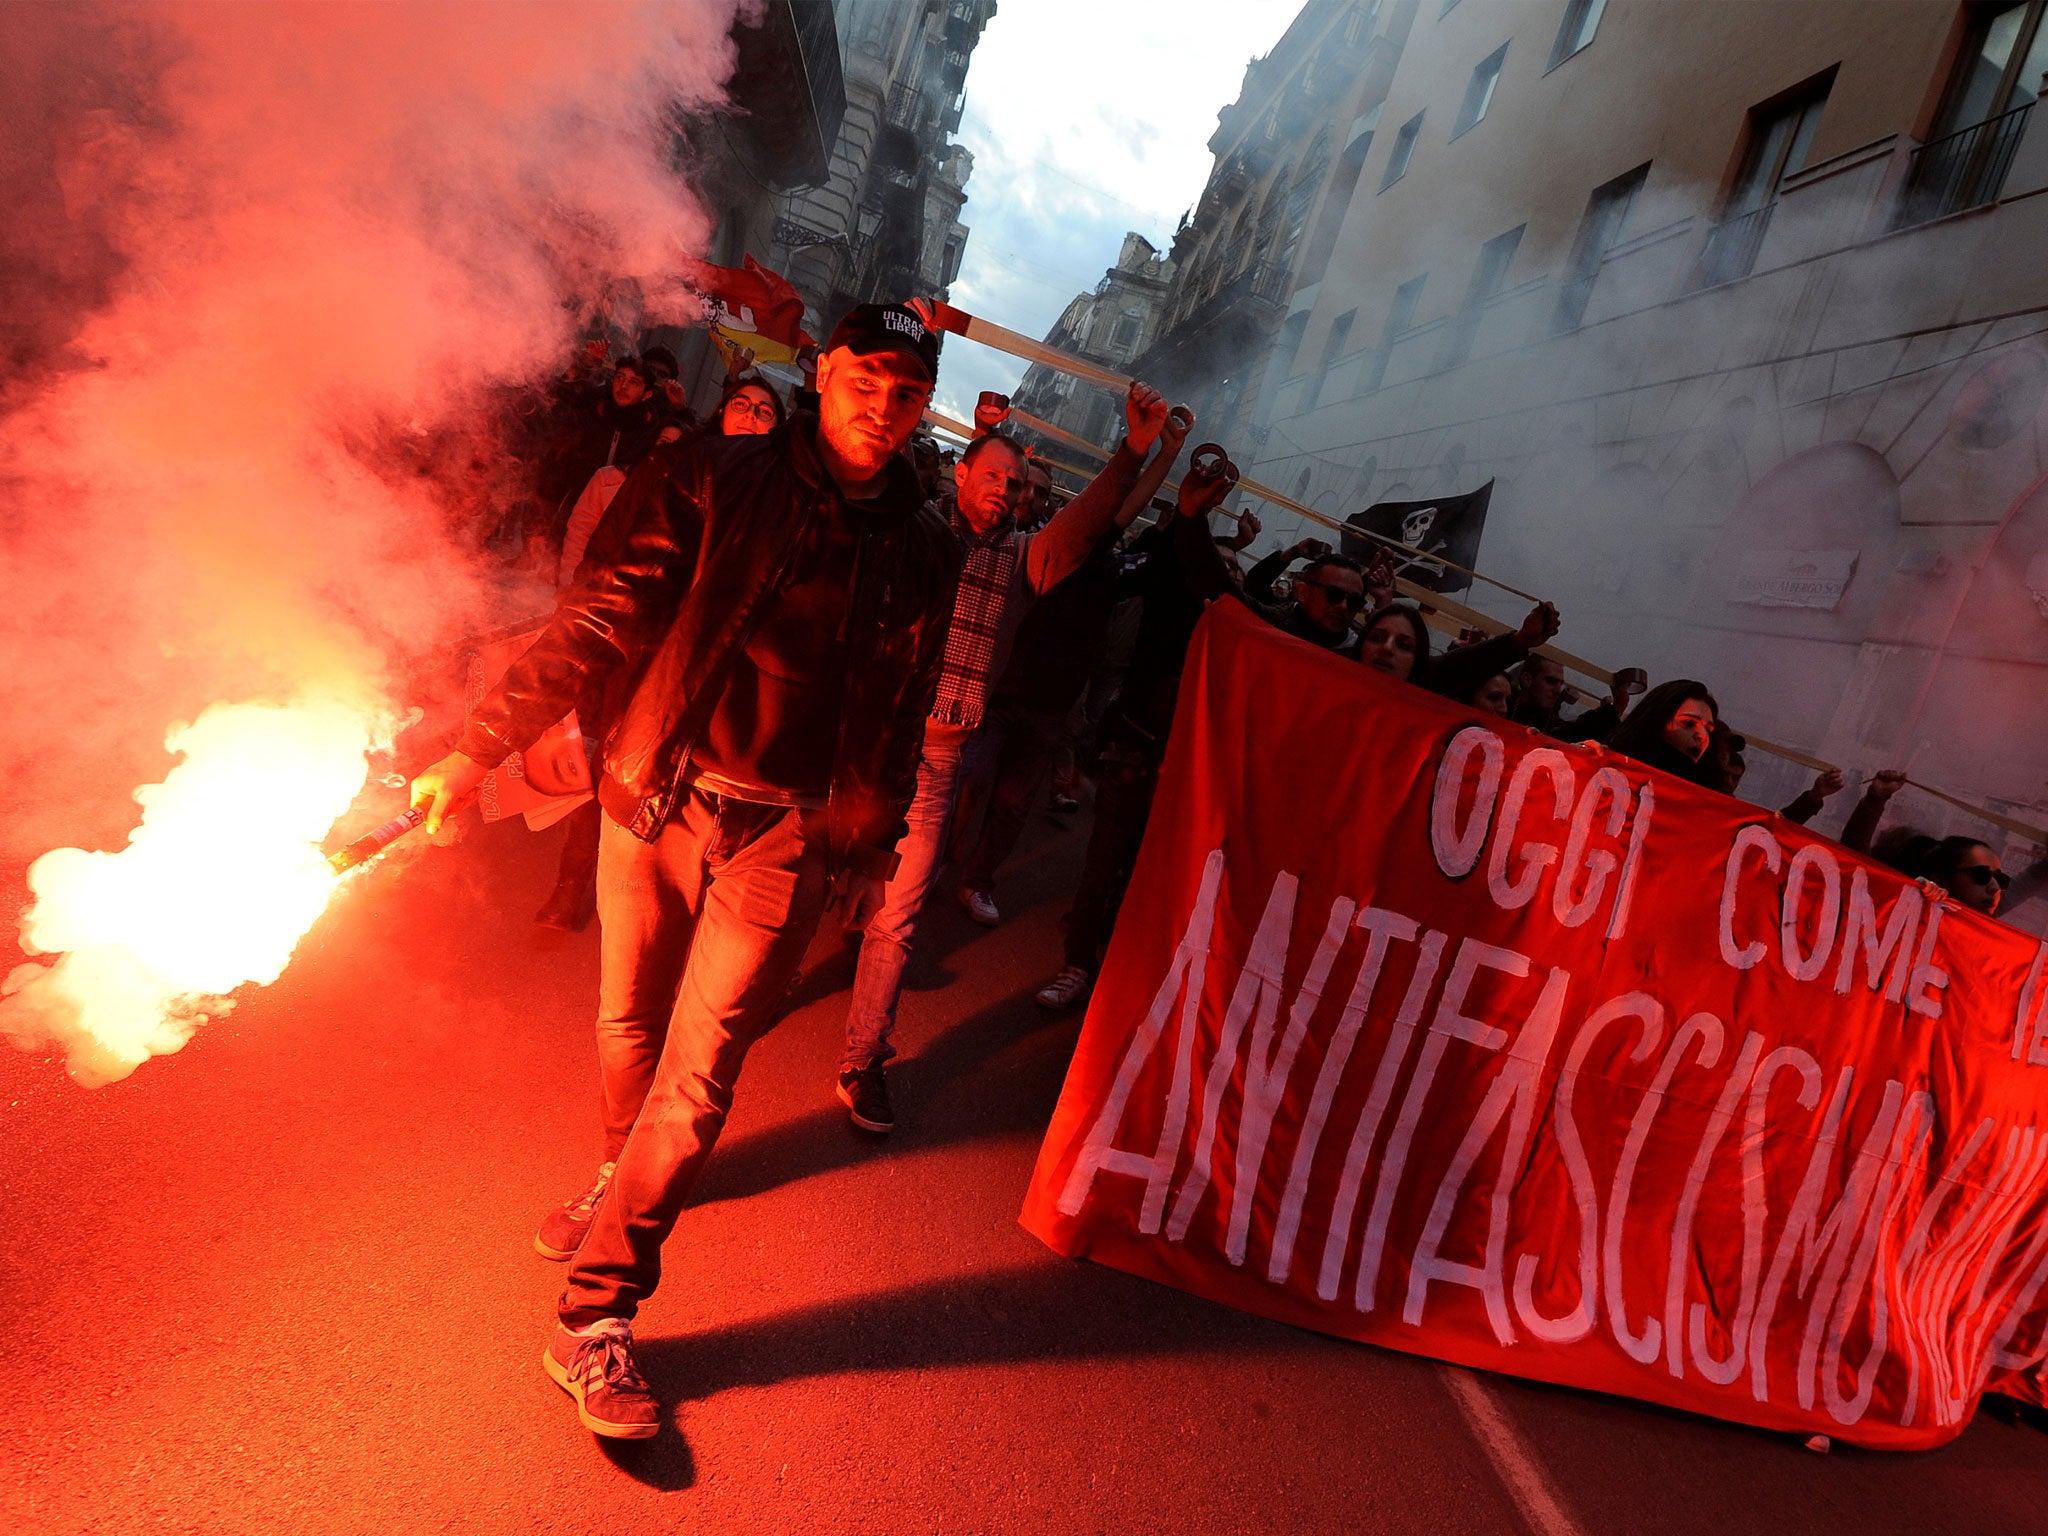 A rally against fascism in Palermo, Sicily, attracted hundreds of protesters